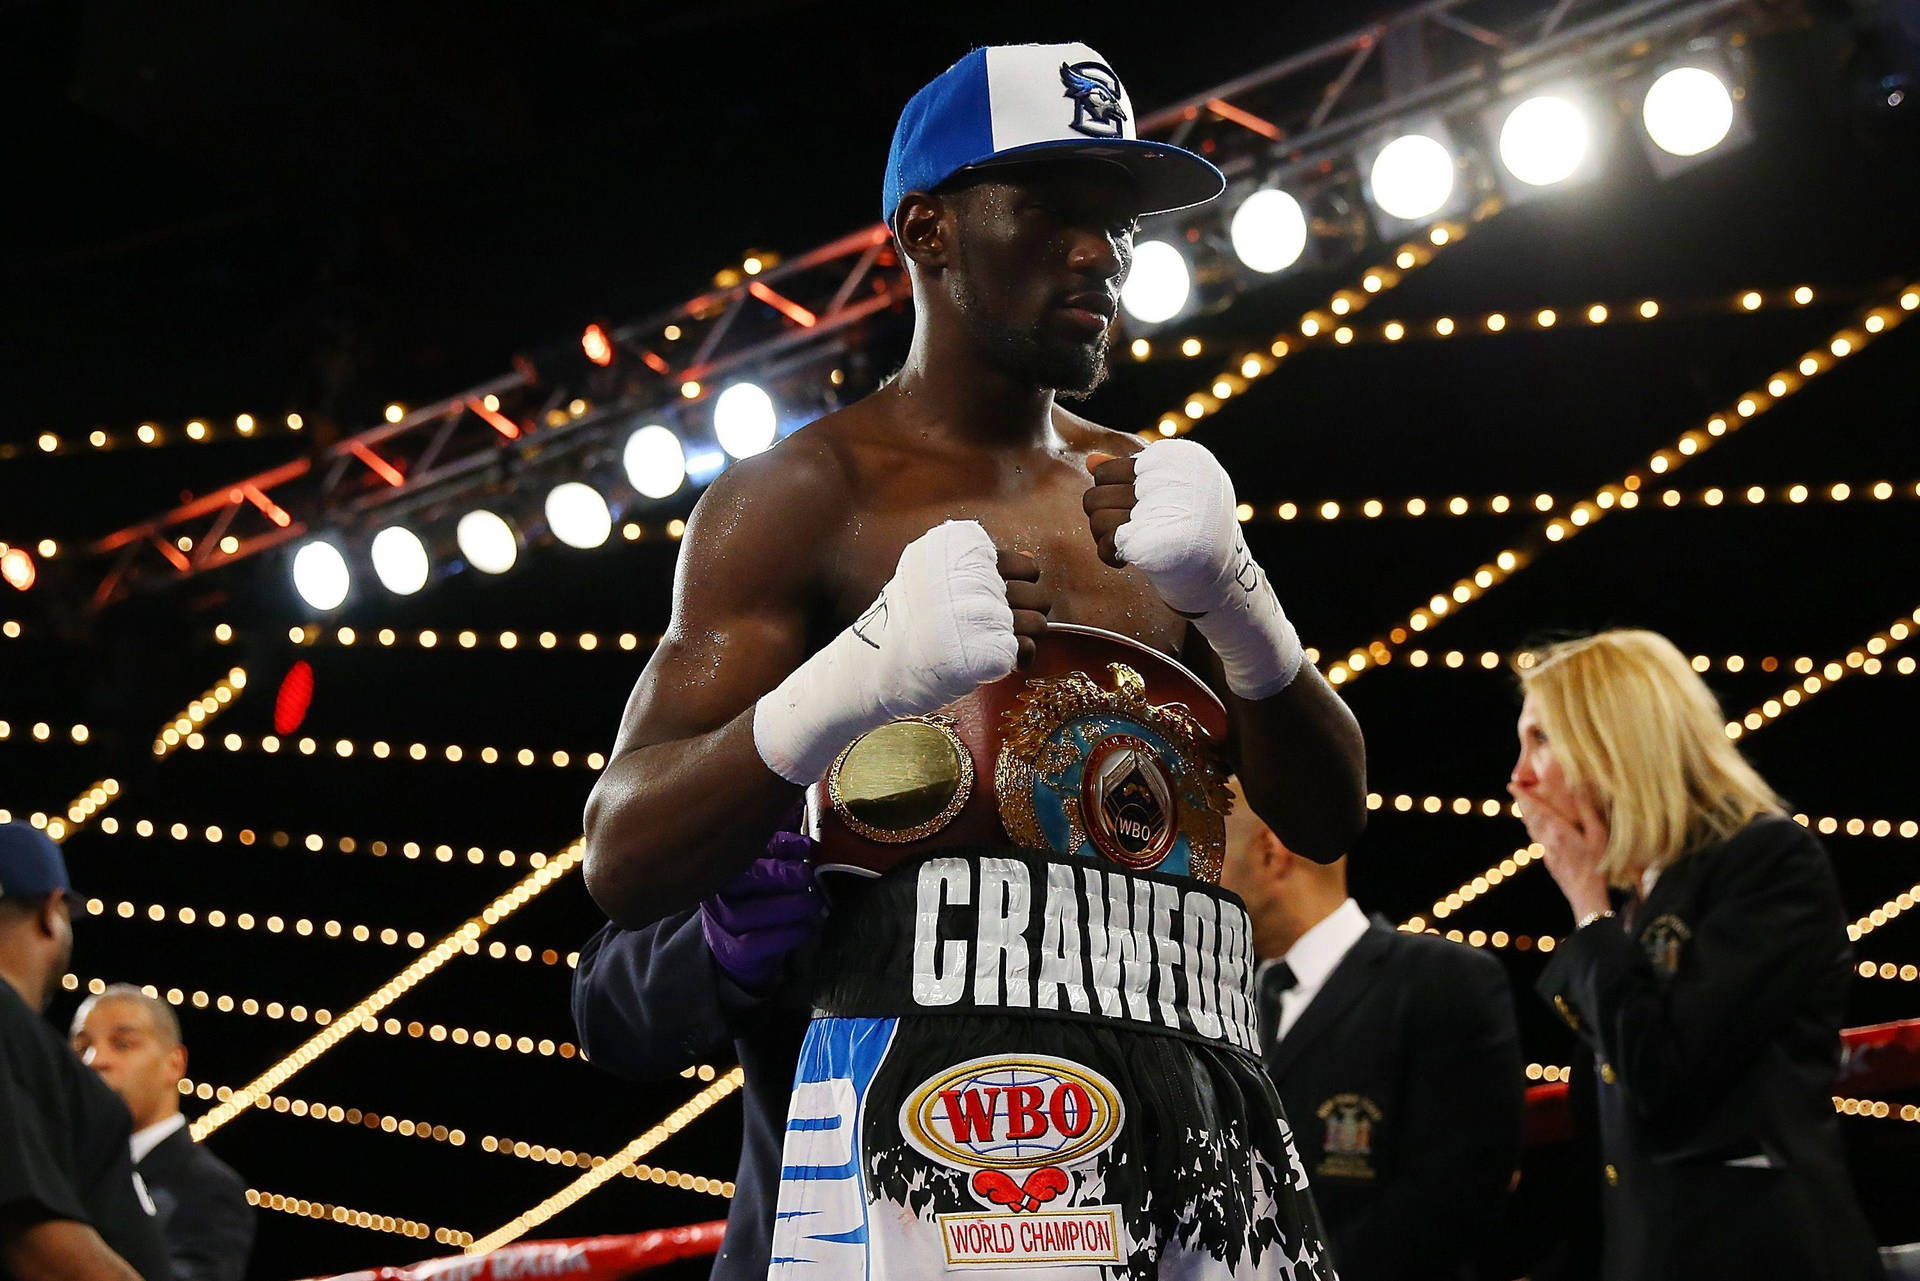 Terencecrawford Many Lights Baseball Cap In German: Terence Crawford Many Lights Baseball-kappe Wallpaper